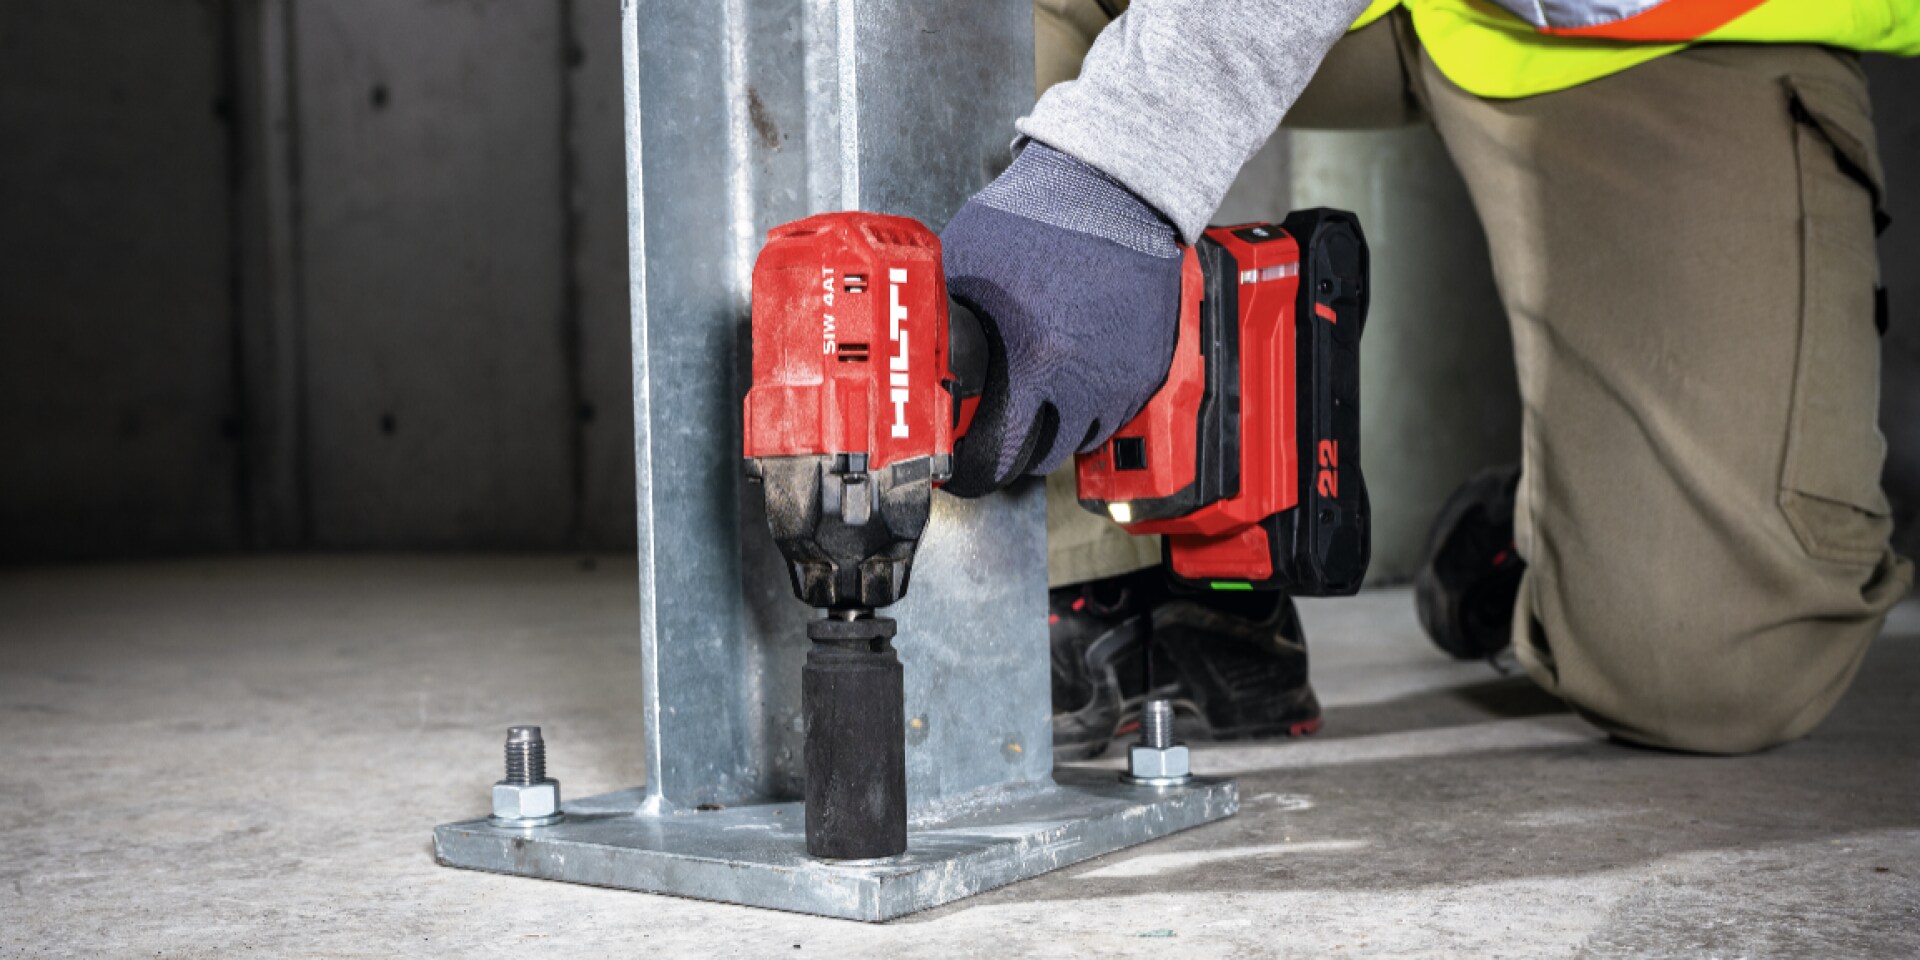  Using the TE 5-22 Cordless Rotary Hammer to secure formwork